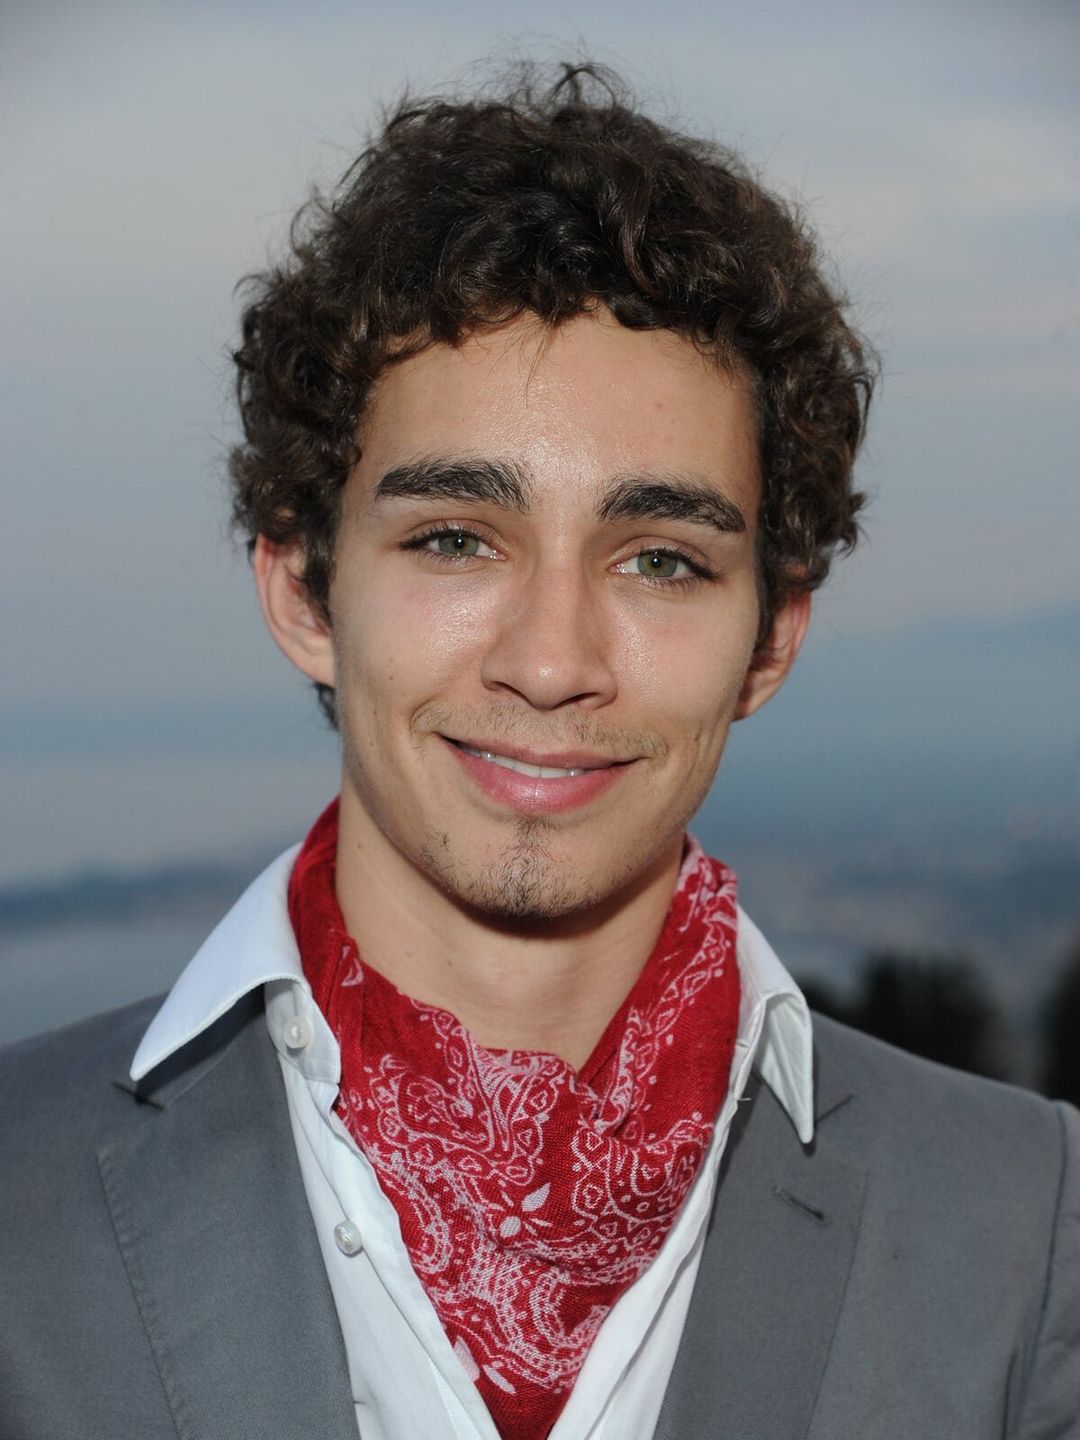 Robert Sheehan does he have a wife